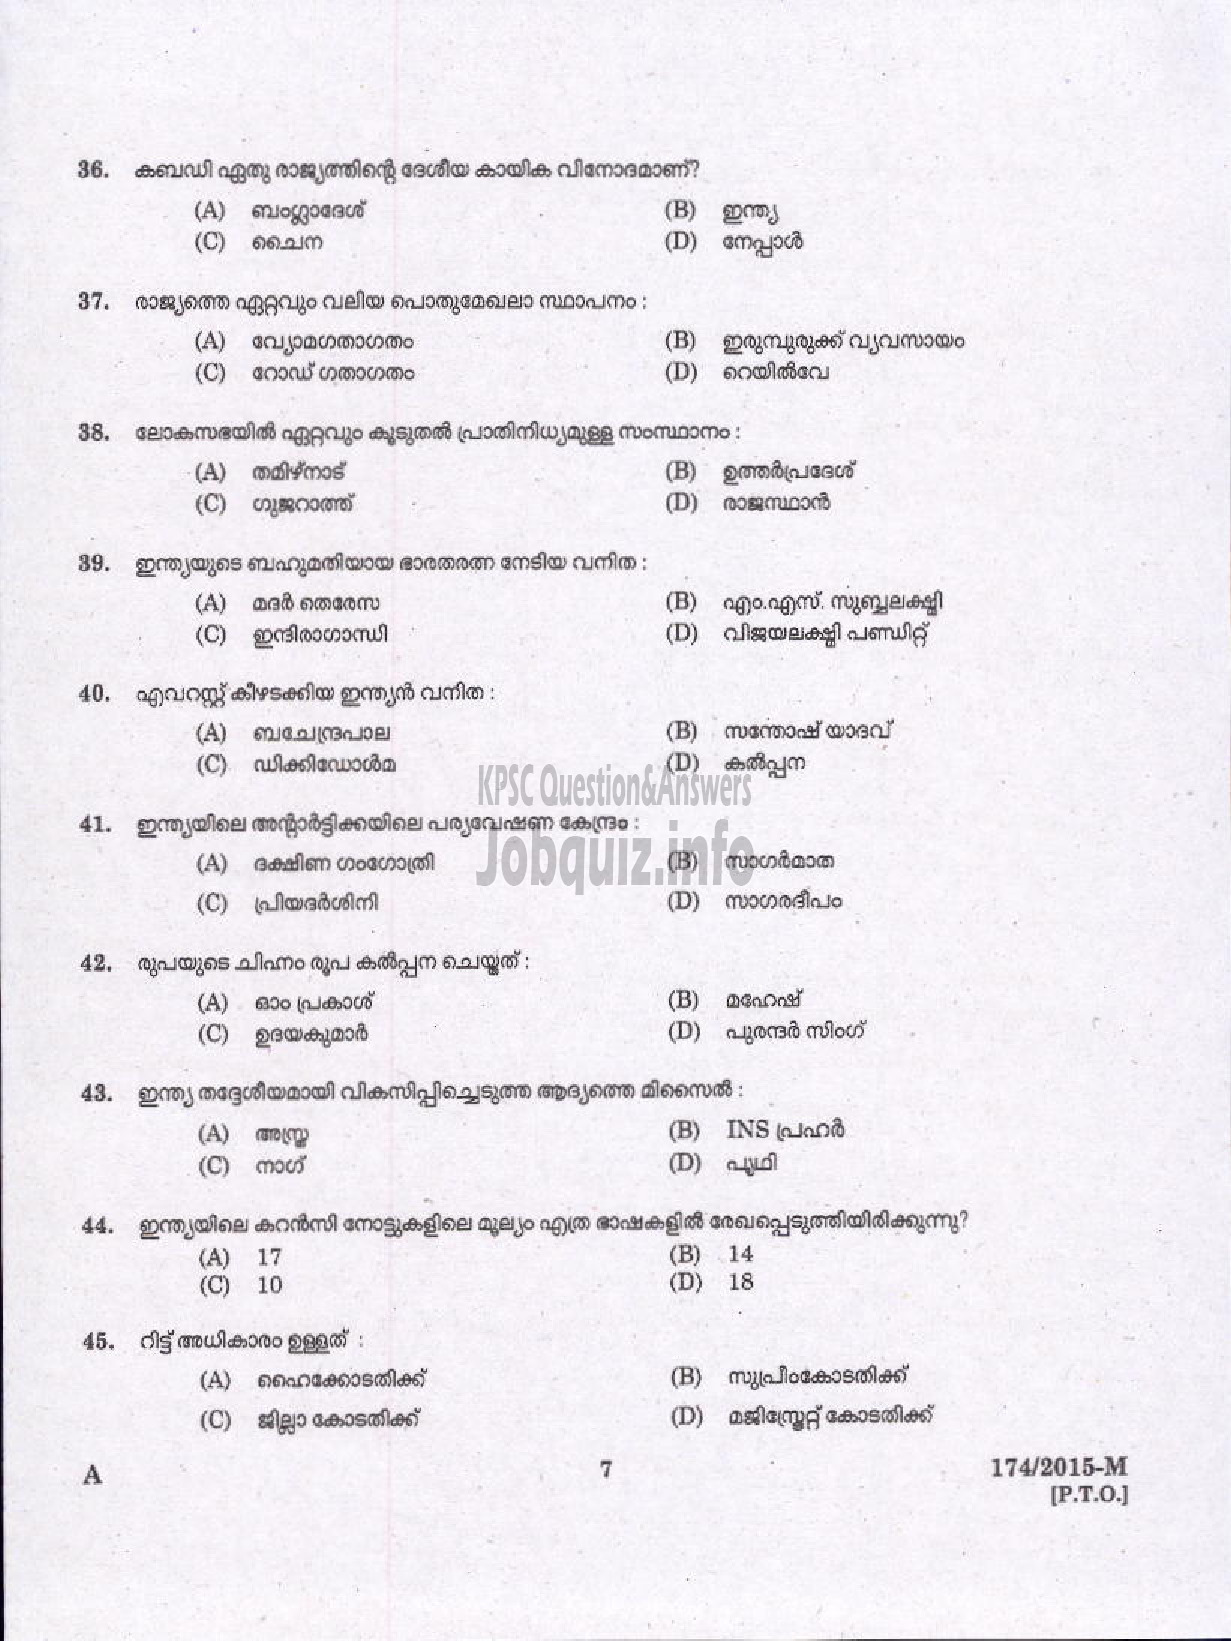 Kerala PSC Question Paper - DRIVER GRADE GR II HDV VARIOUS/EXCISE ( Malayalam ) -5